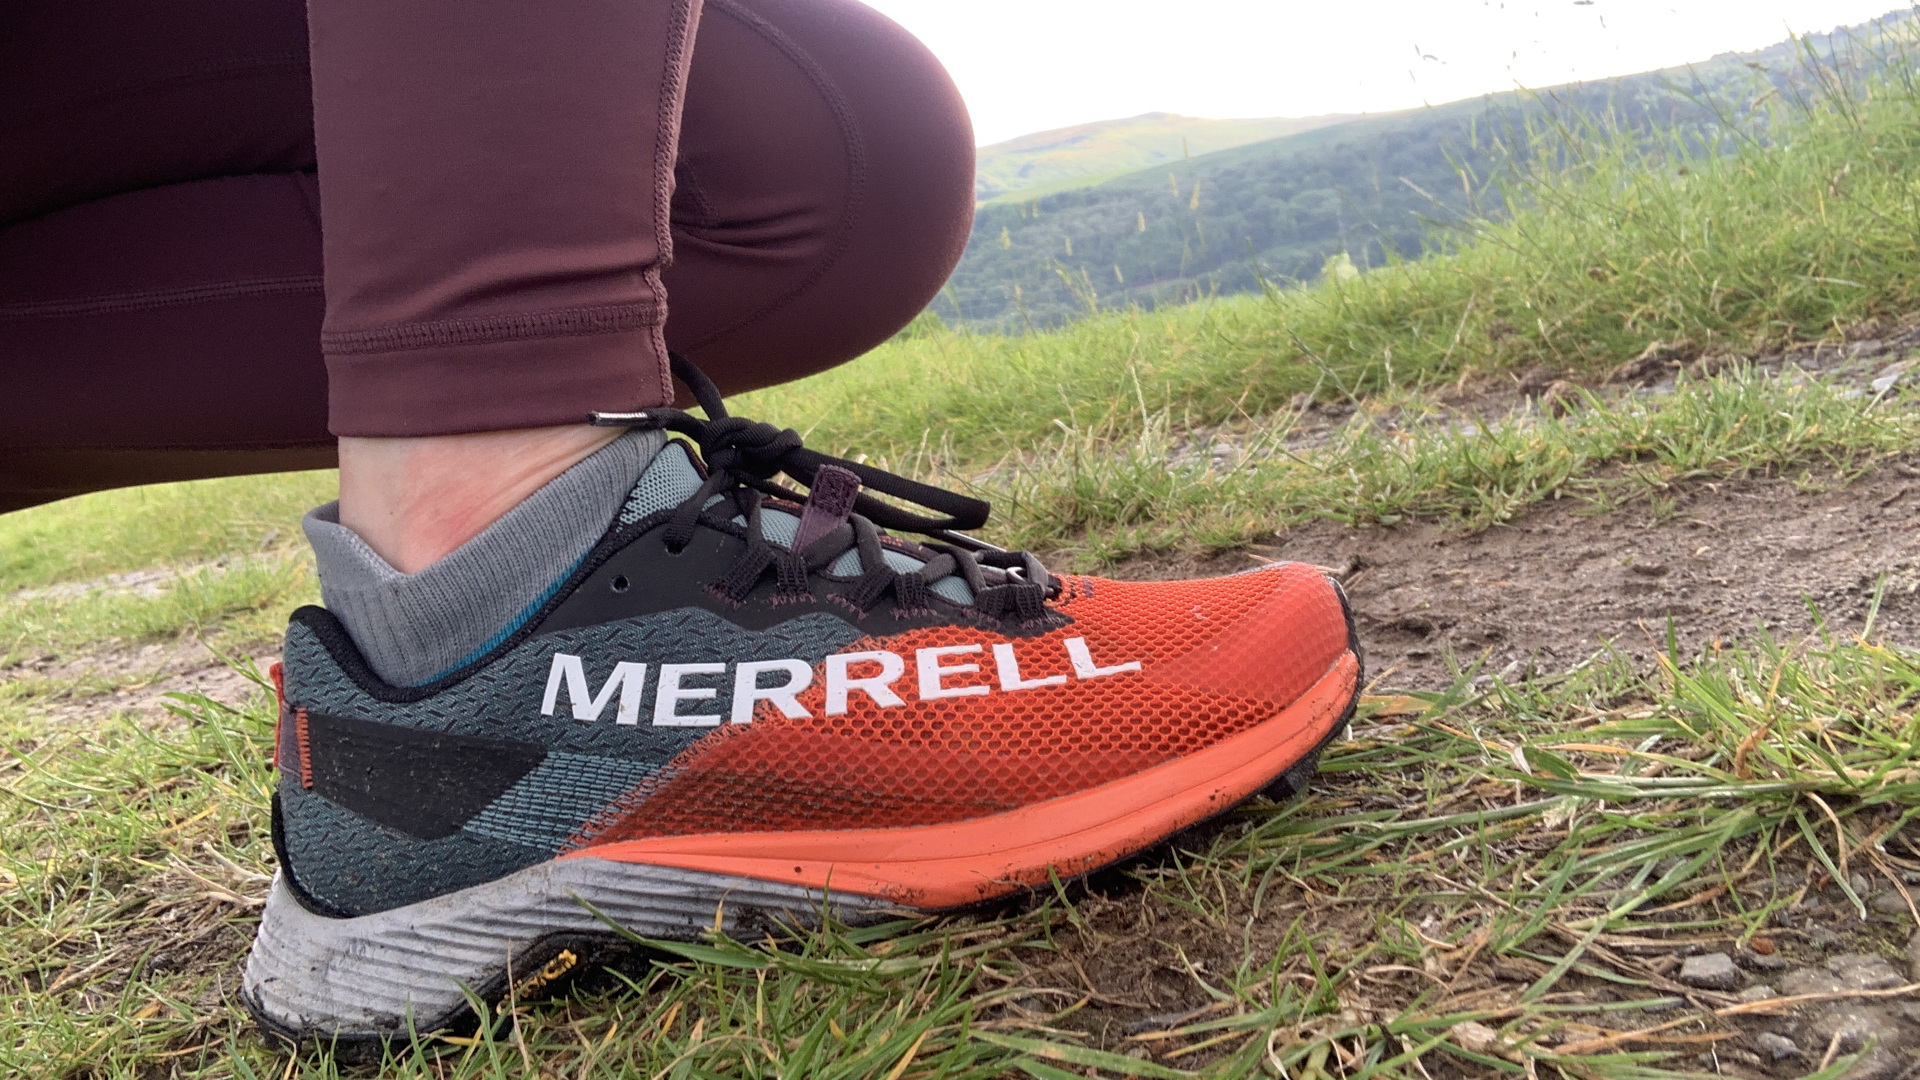 Merrell MTL Long Sky 2 trail running shoes review: lock for technical trails |